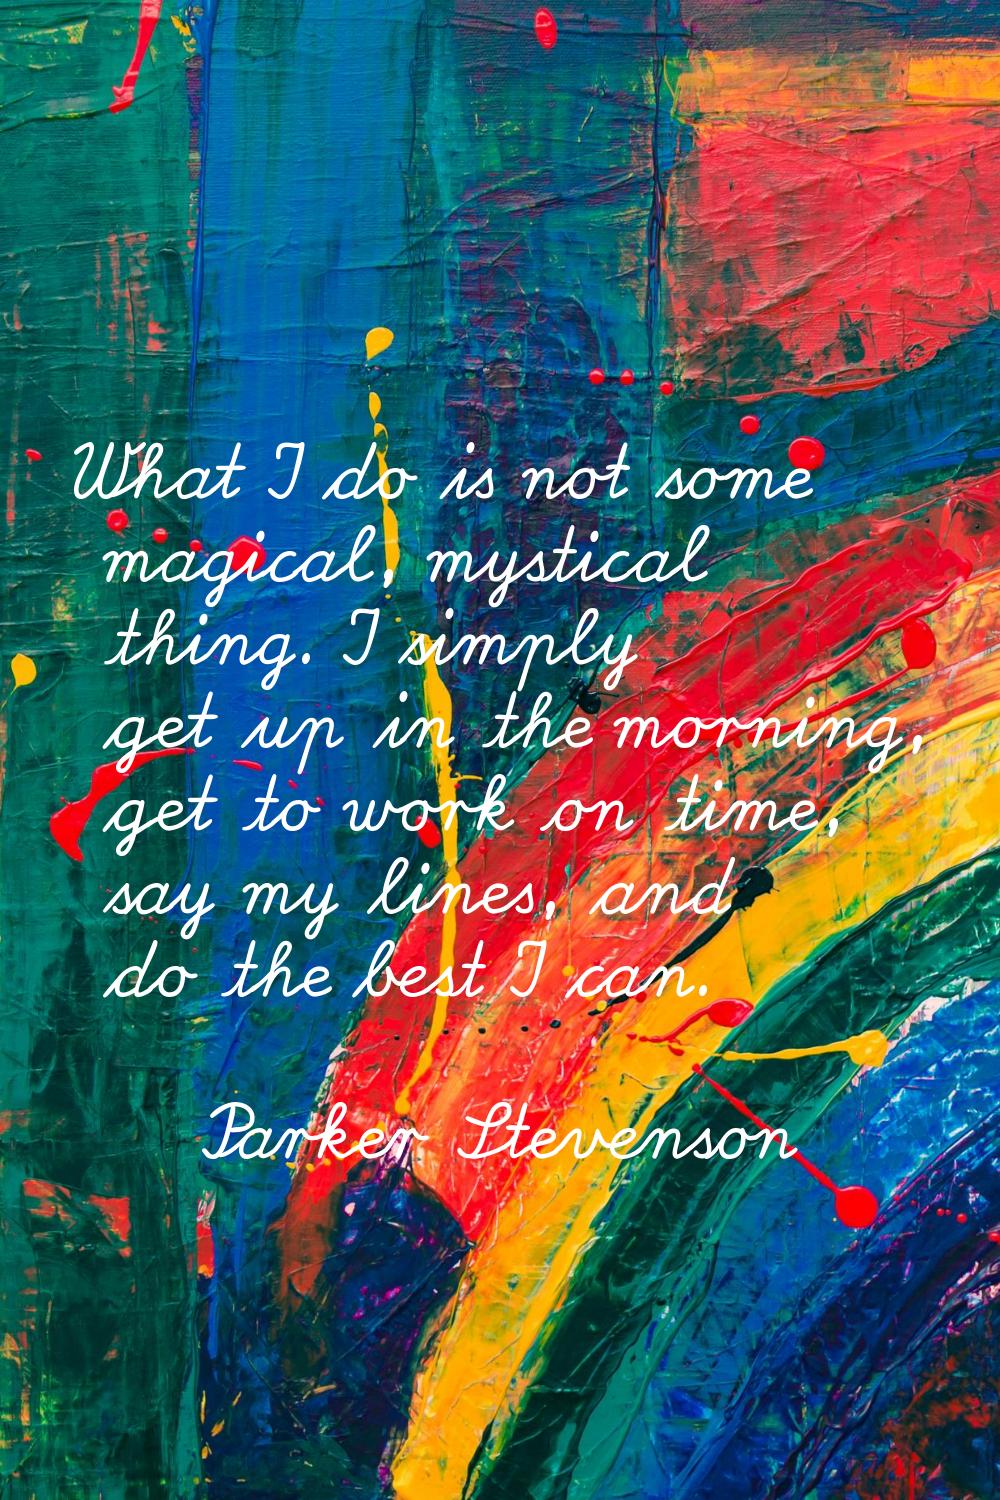 What I do is not some magical, mystical thing. I simply get up in the morning, get to work on time,